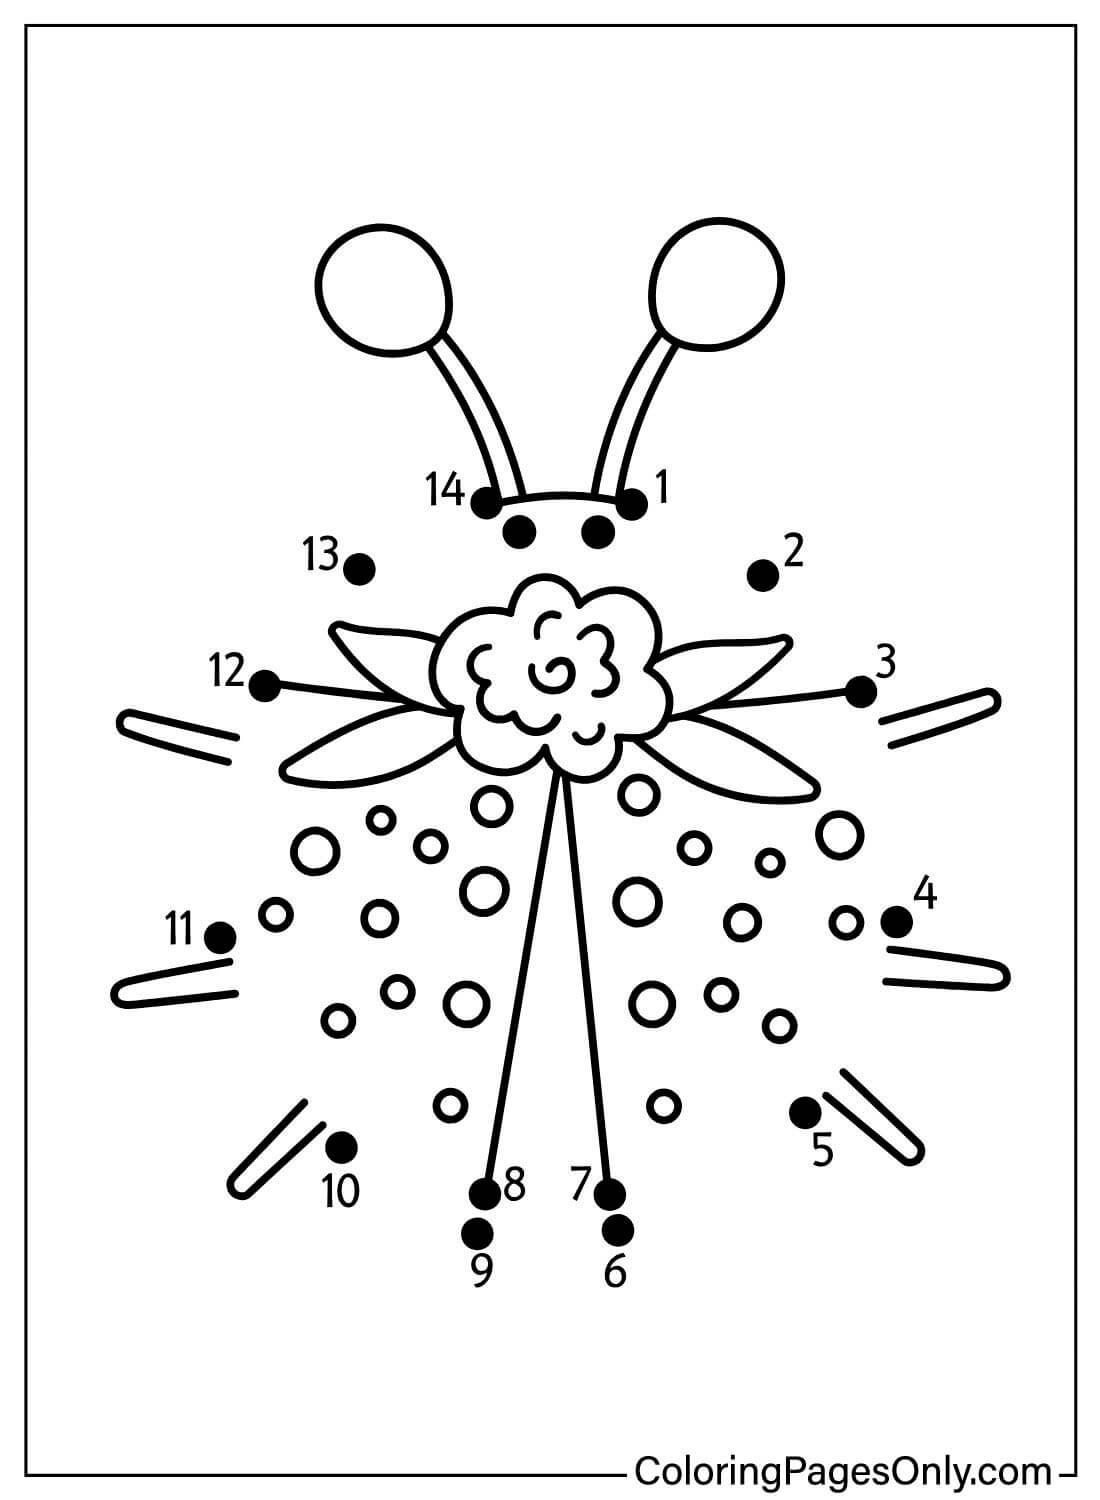 Connect the Dots Ladybug Coloring Sheets from Ladybug